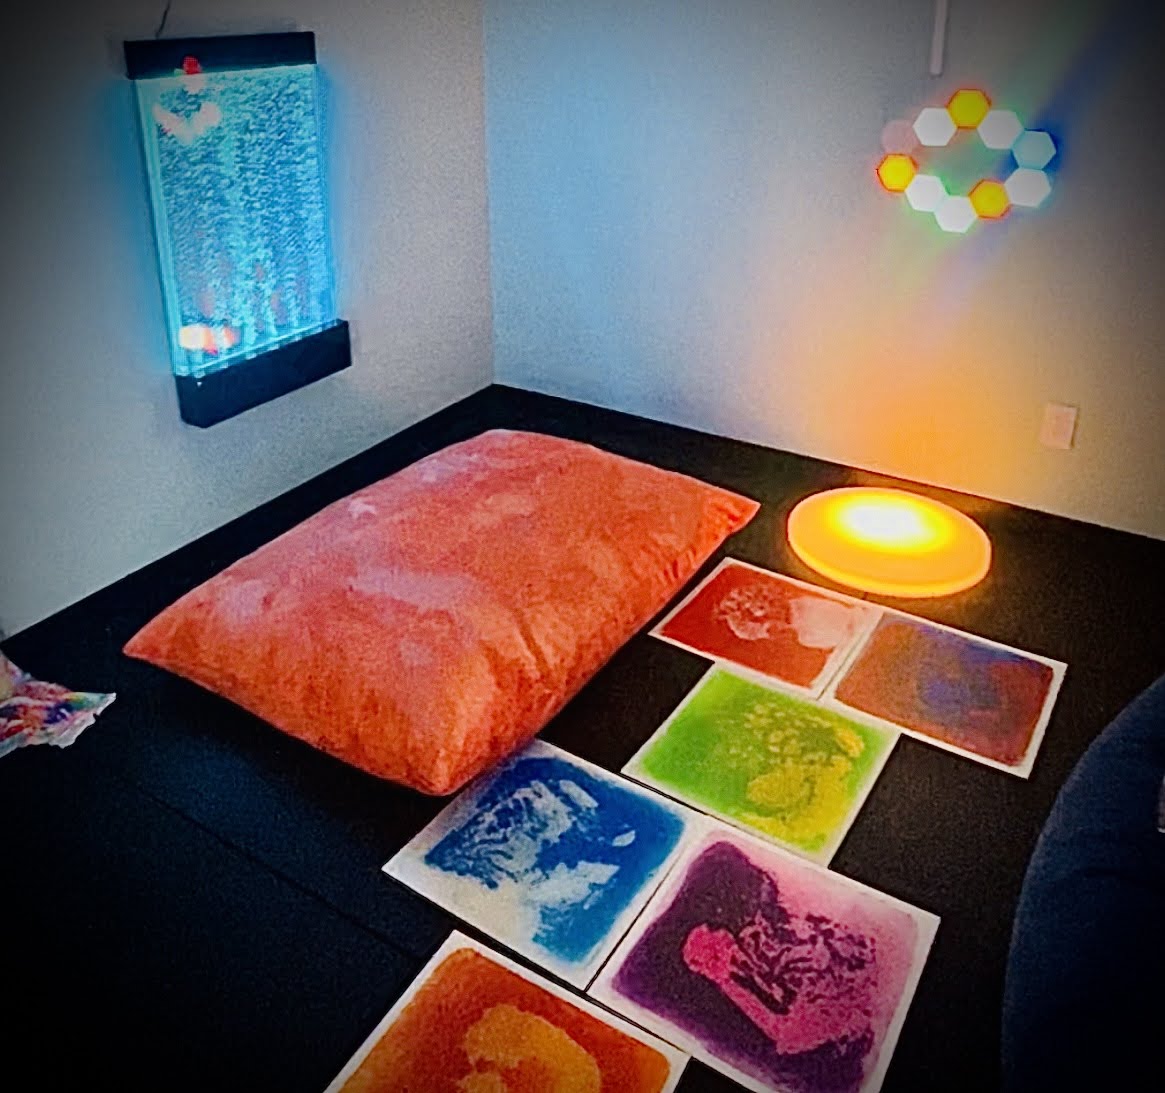 sensory room with color gel floor tiles, bubble wall and bean bag